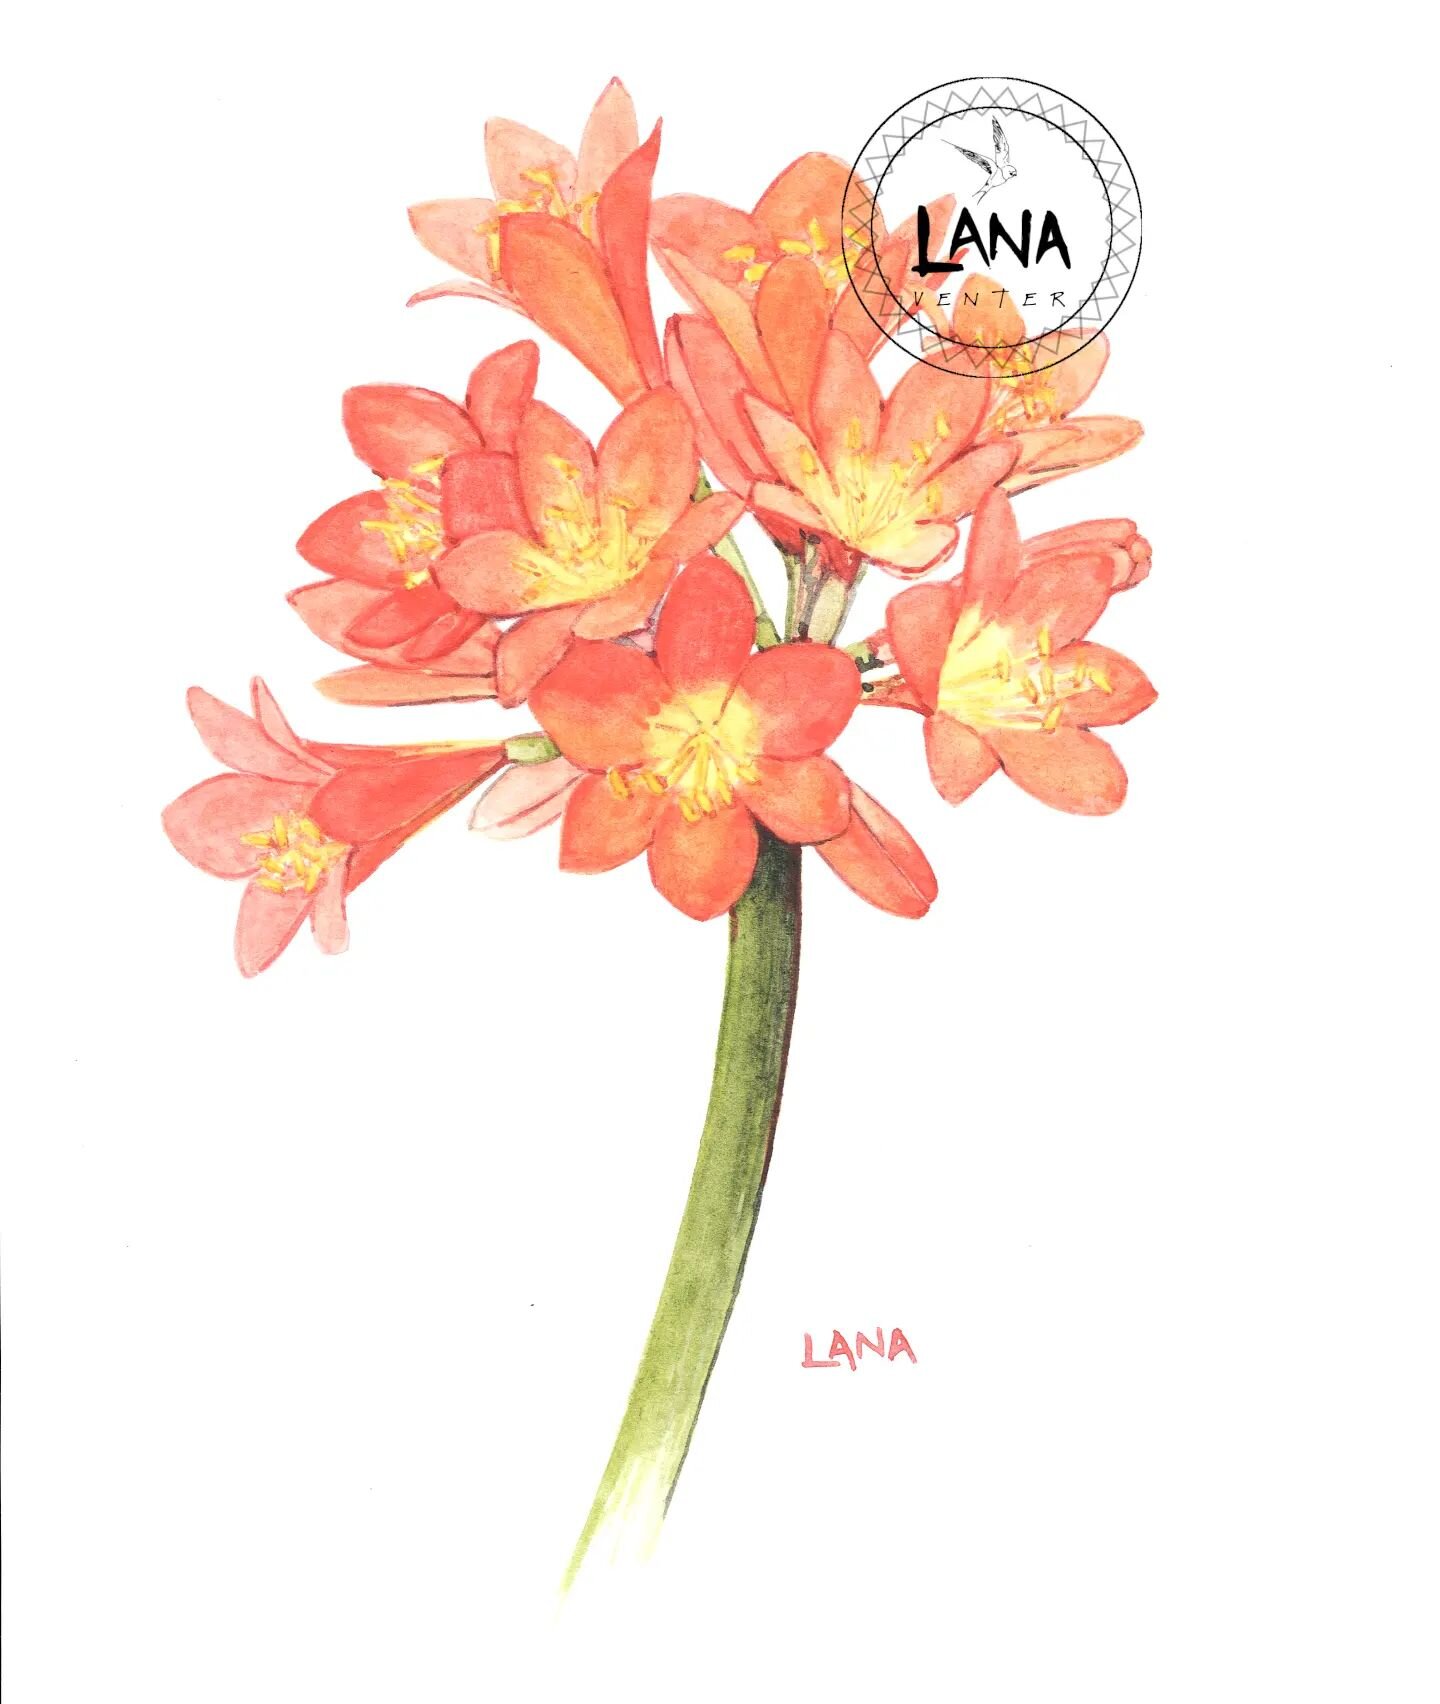 The Flowers My Mom Loved:

Clivia.

In my mind's eye I can see my mom standing under the palm trees among the Clivias. Hunched over, trying to detect new blooms developing beneath the leaves.

She would count them and be very impressed if the upcomin